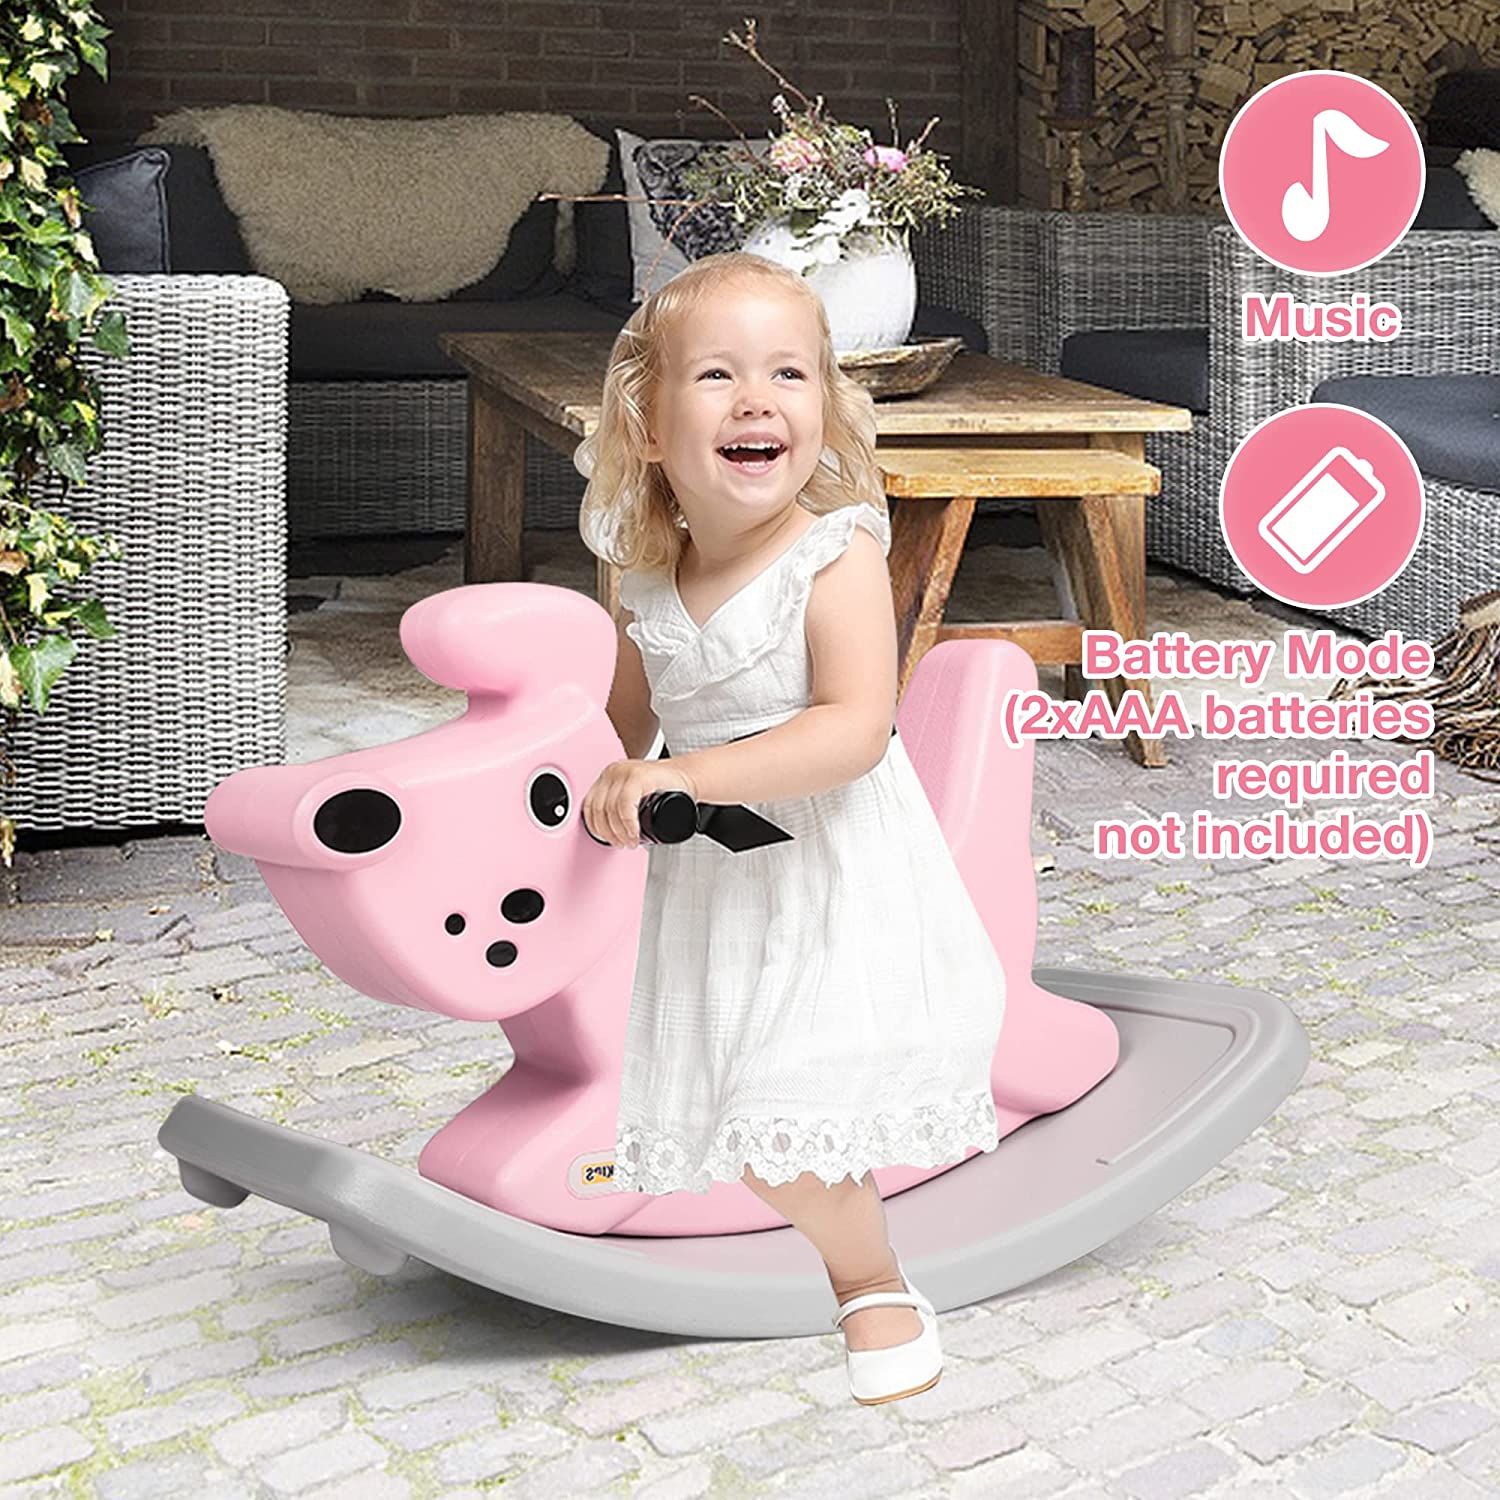 Kids Ride-on Toy Rocking Horse with Music for Toddlers 1-3 Years Old, Pink